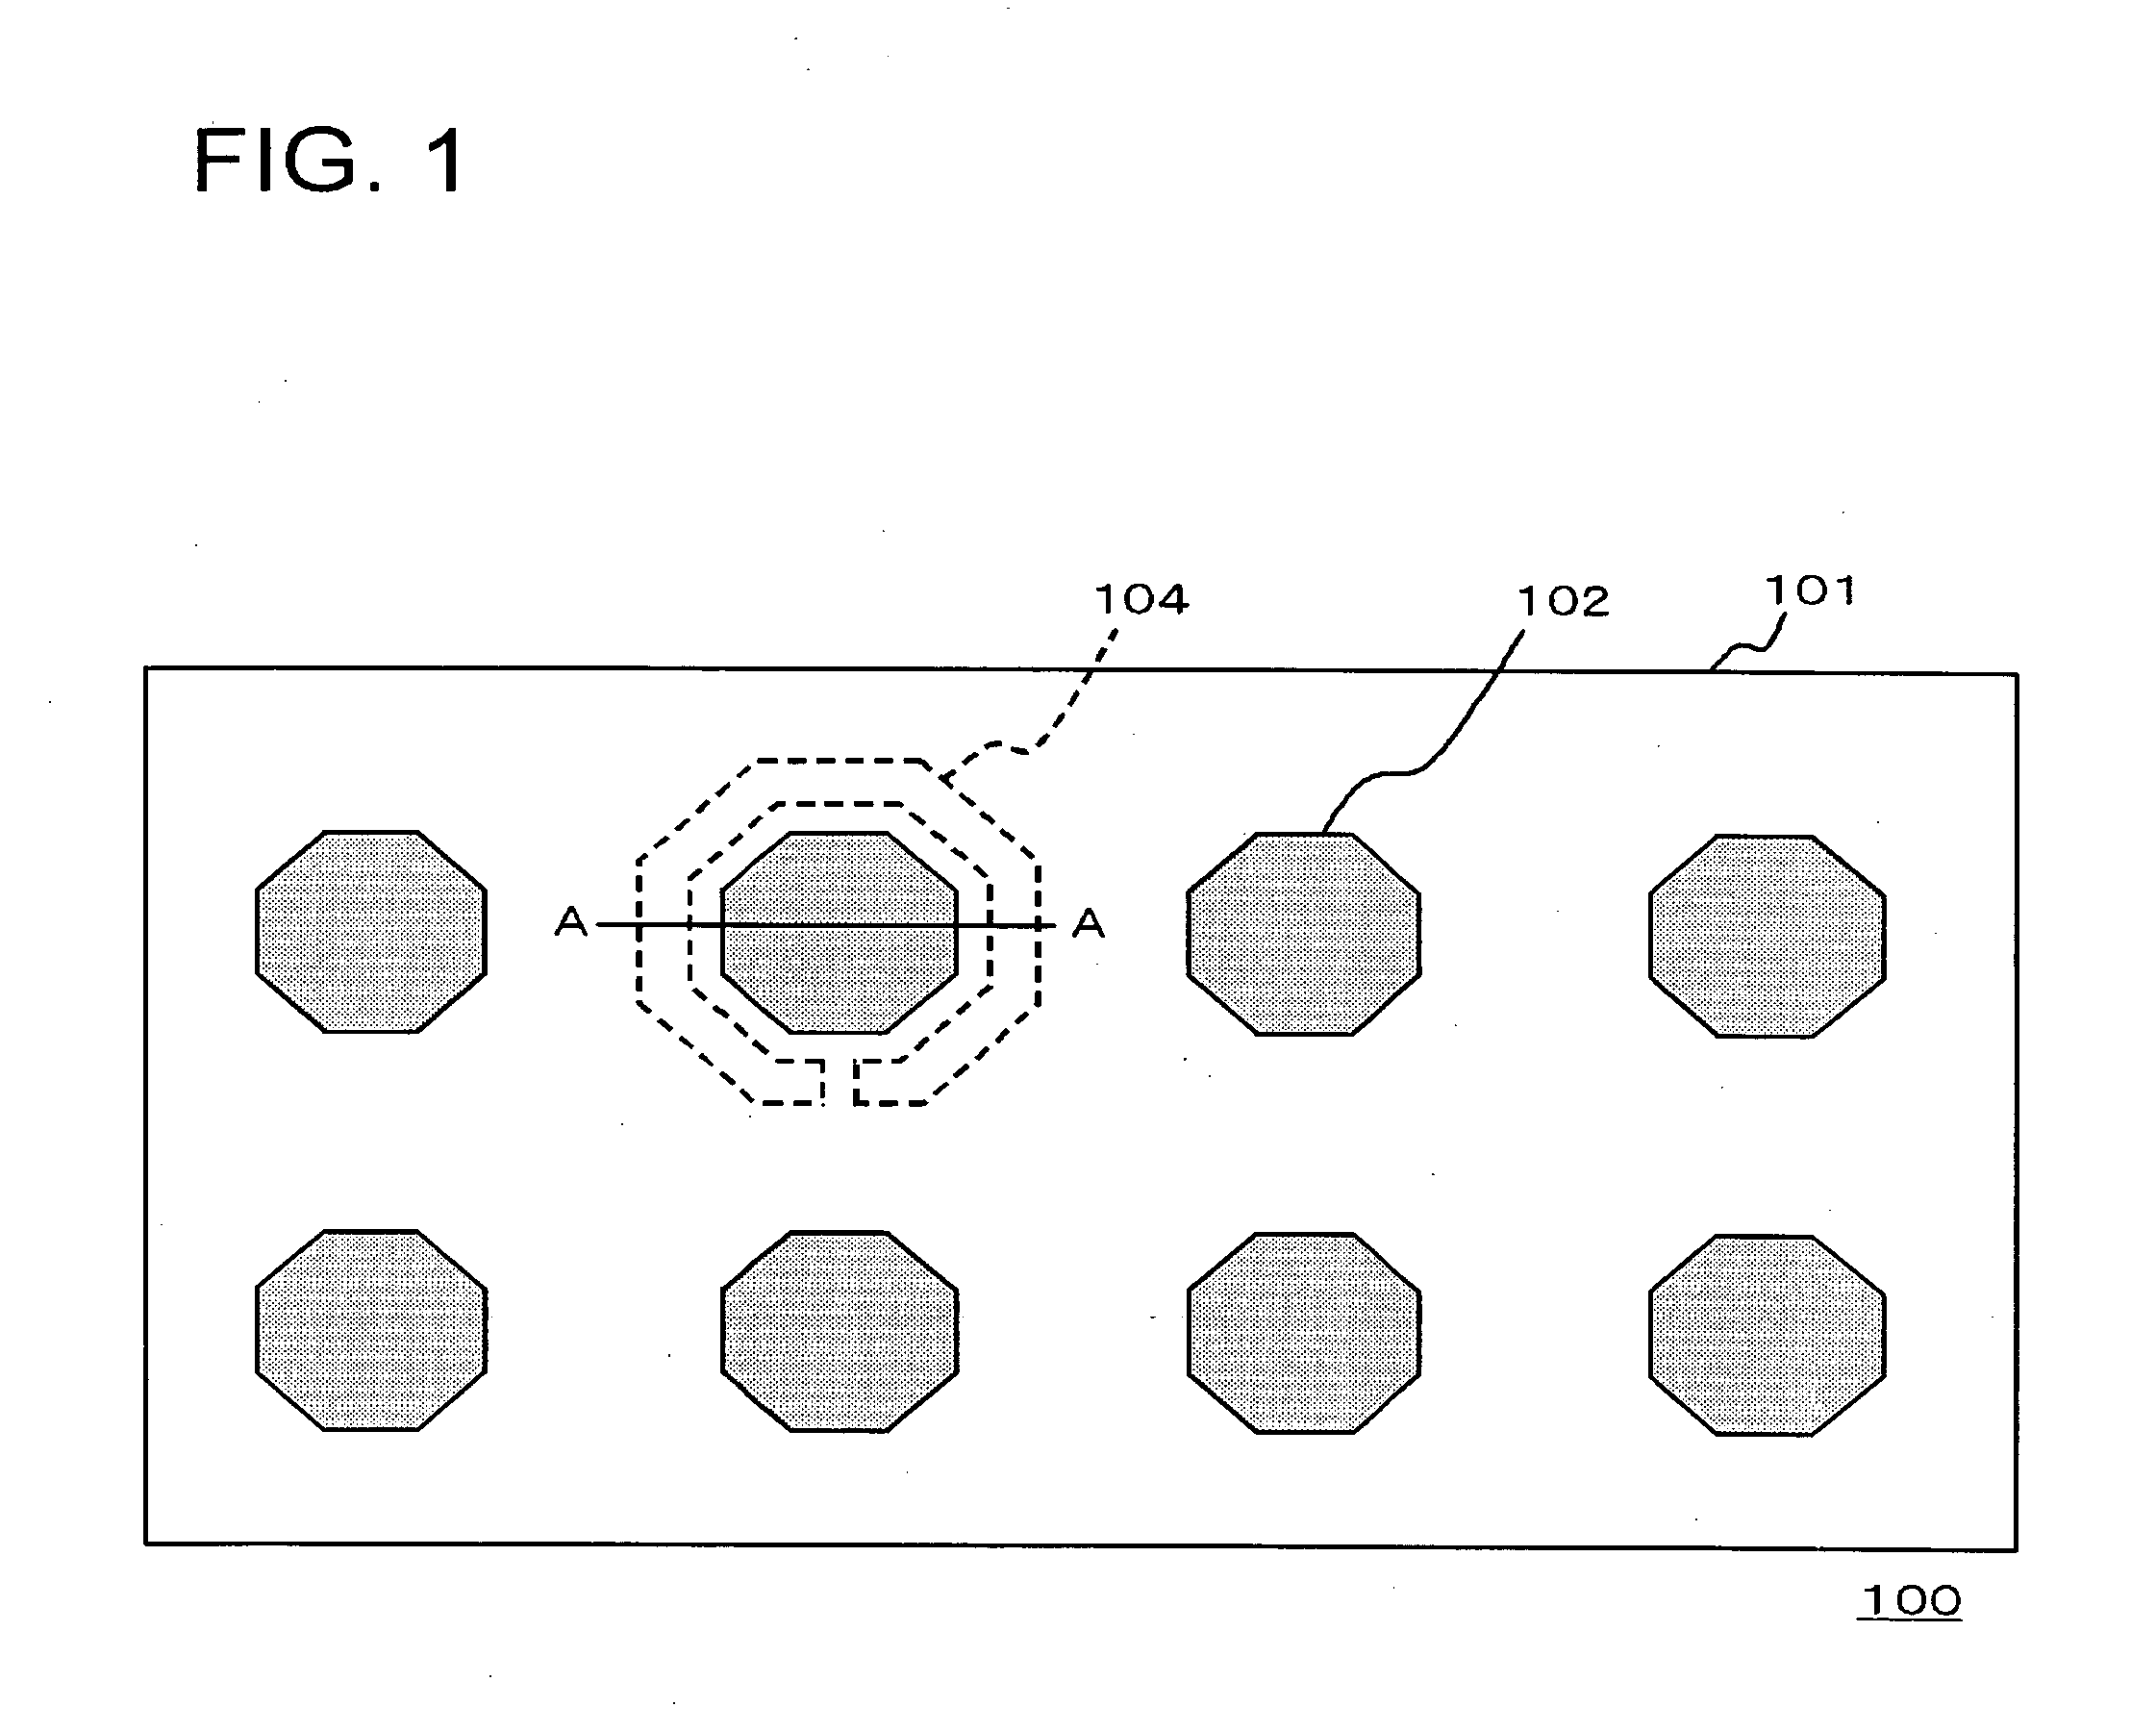 Circuit board and semiconductor device